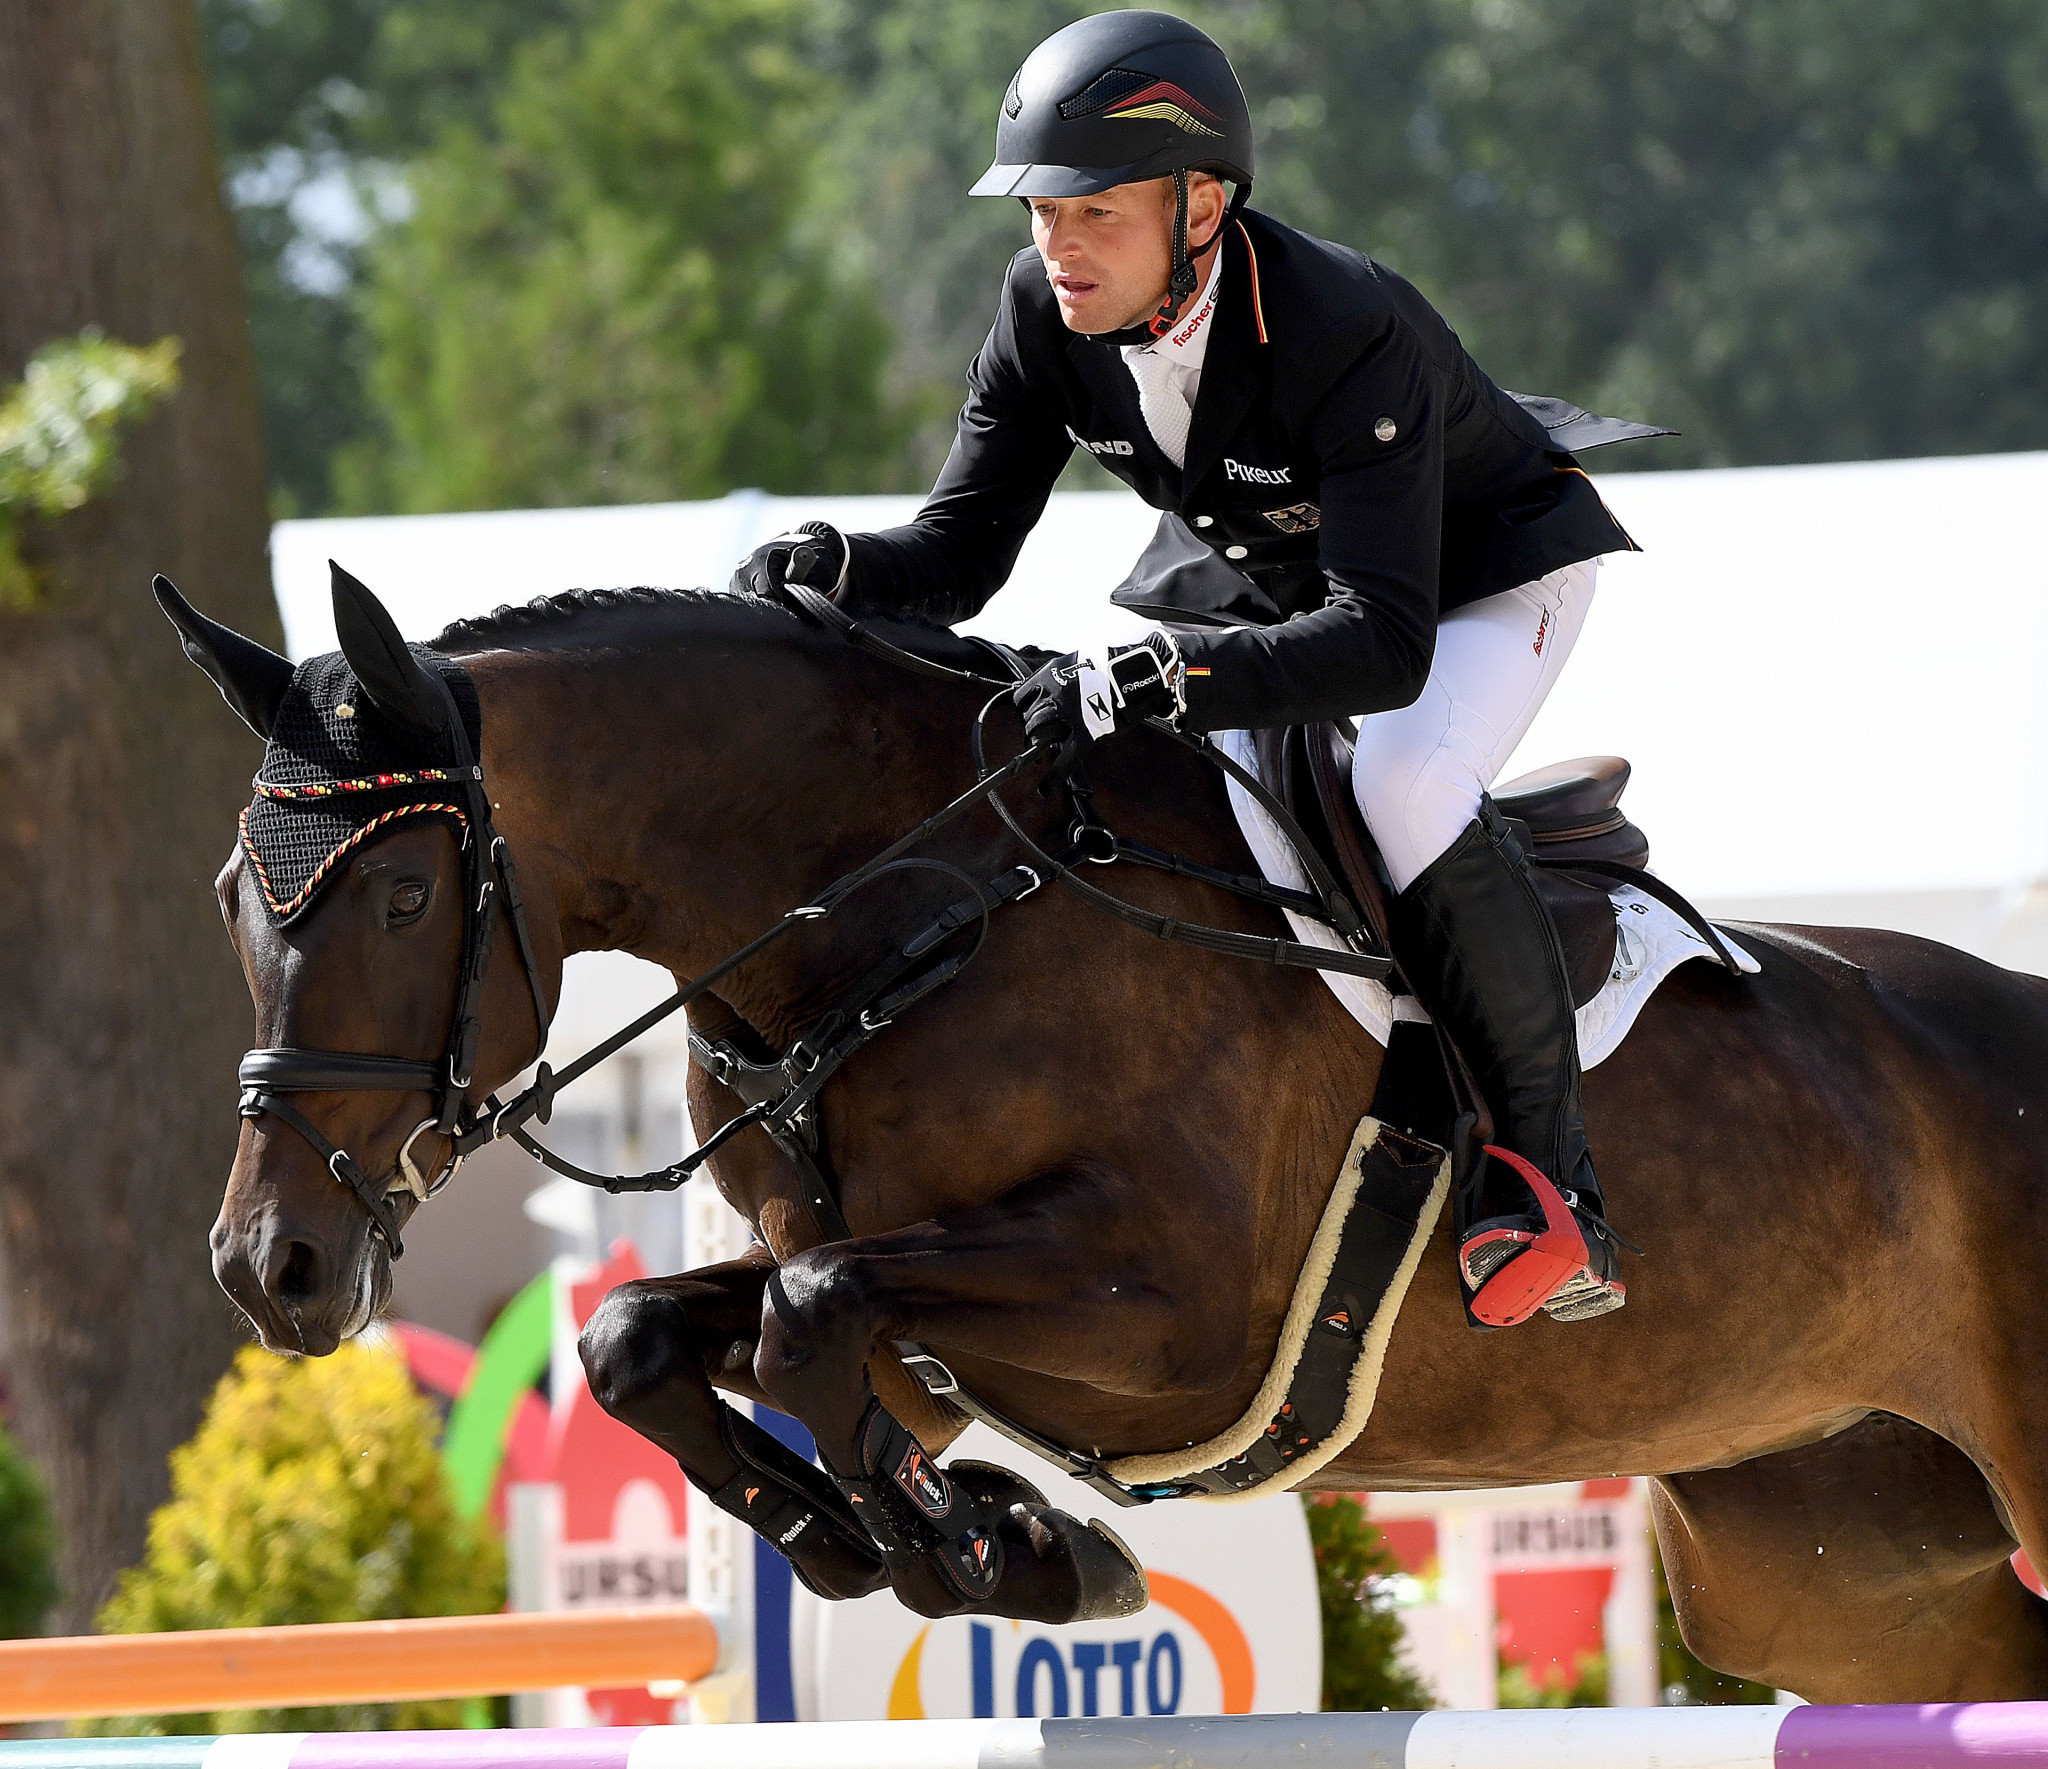 Jung to be crowned as FEI Classics winner at Burghley Horse Trials